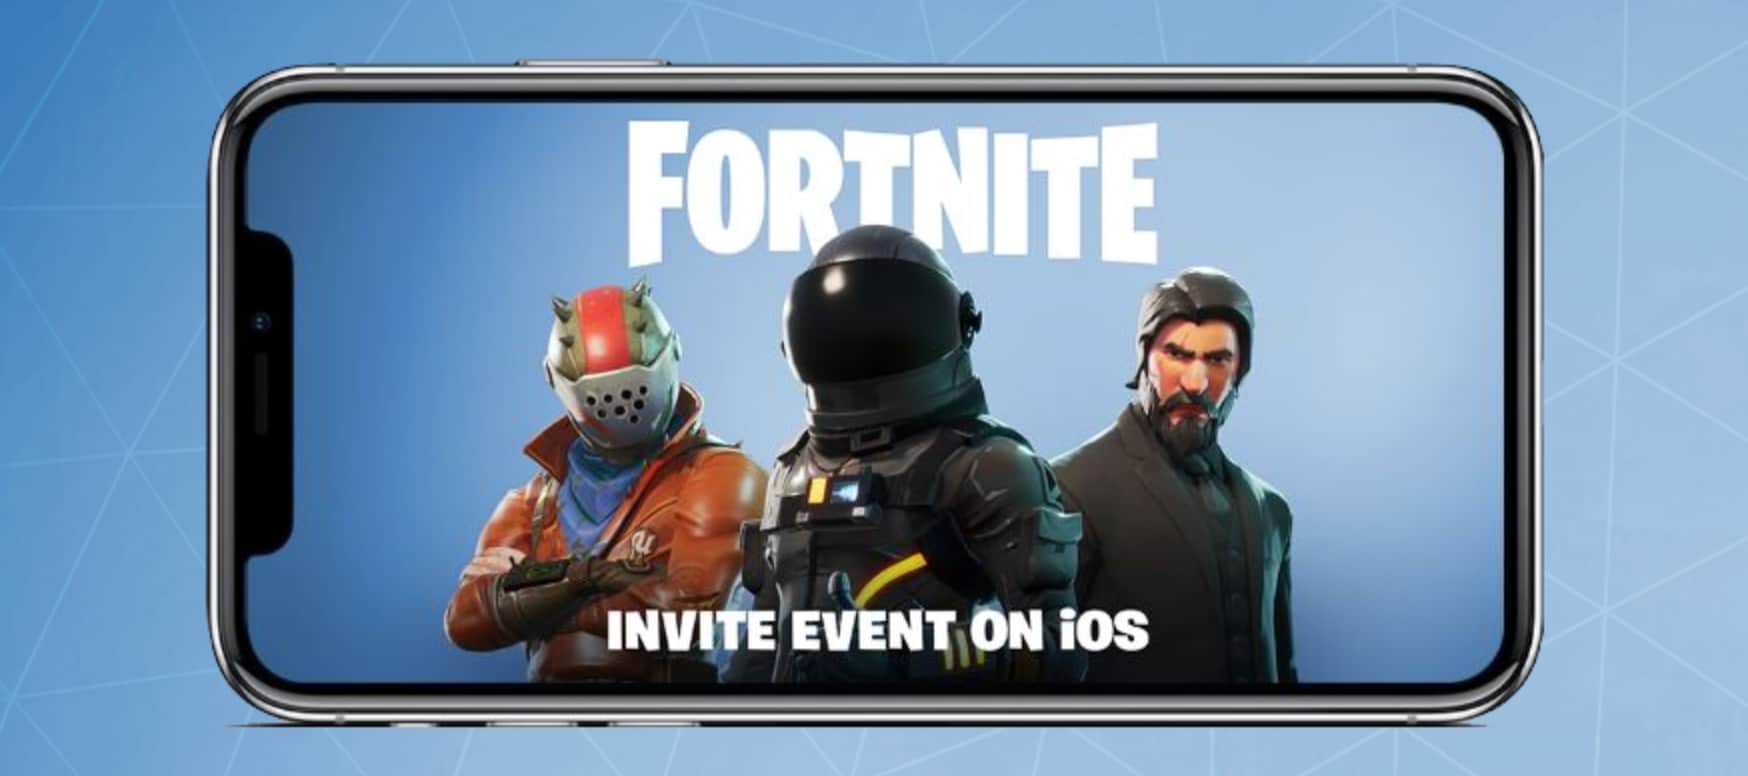 Epic is putting Fortnite in your pocket.